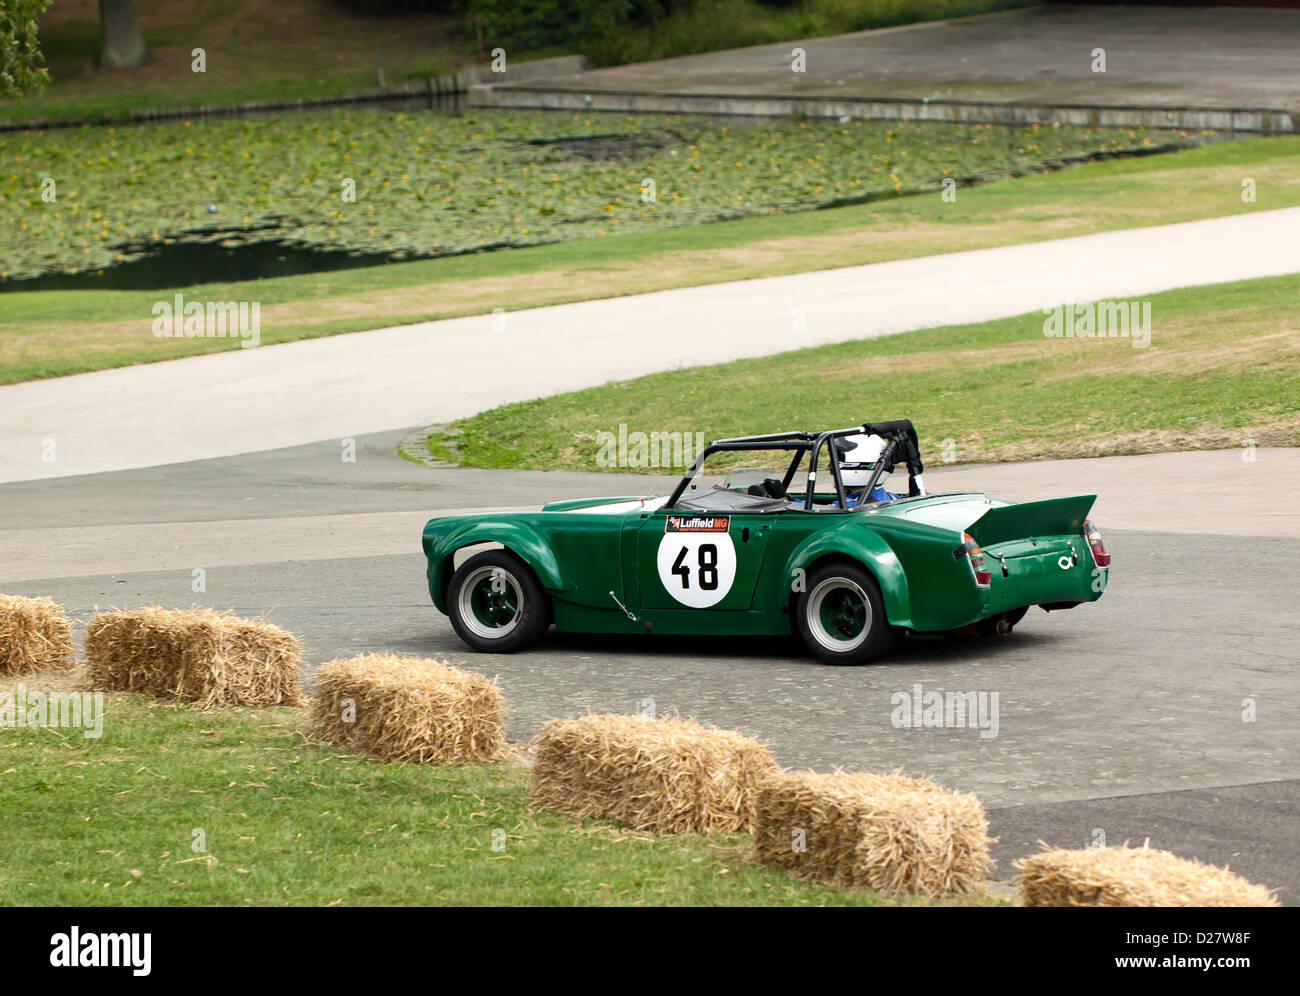 Steve Luscome driving a 1966/1970 MG Midget in the Sprint event at motorsport at the palace 2011 Stock Photo